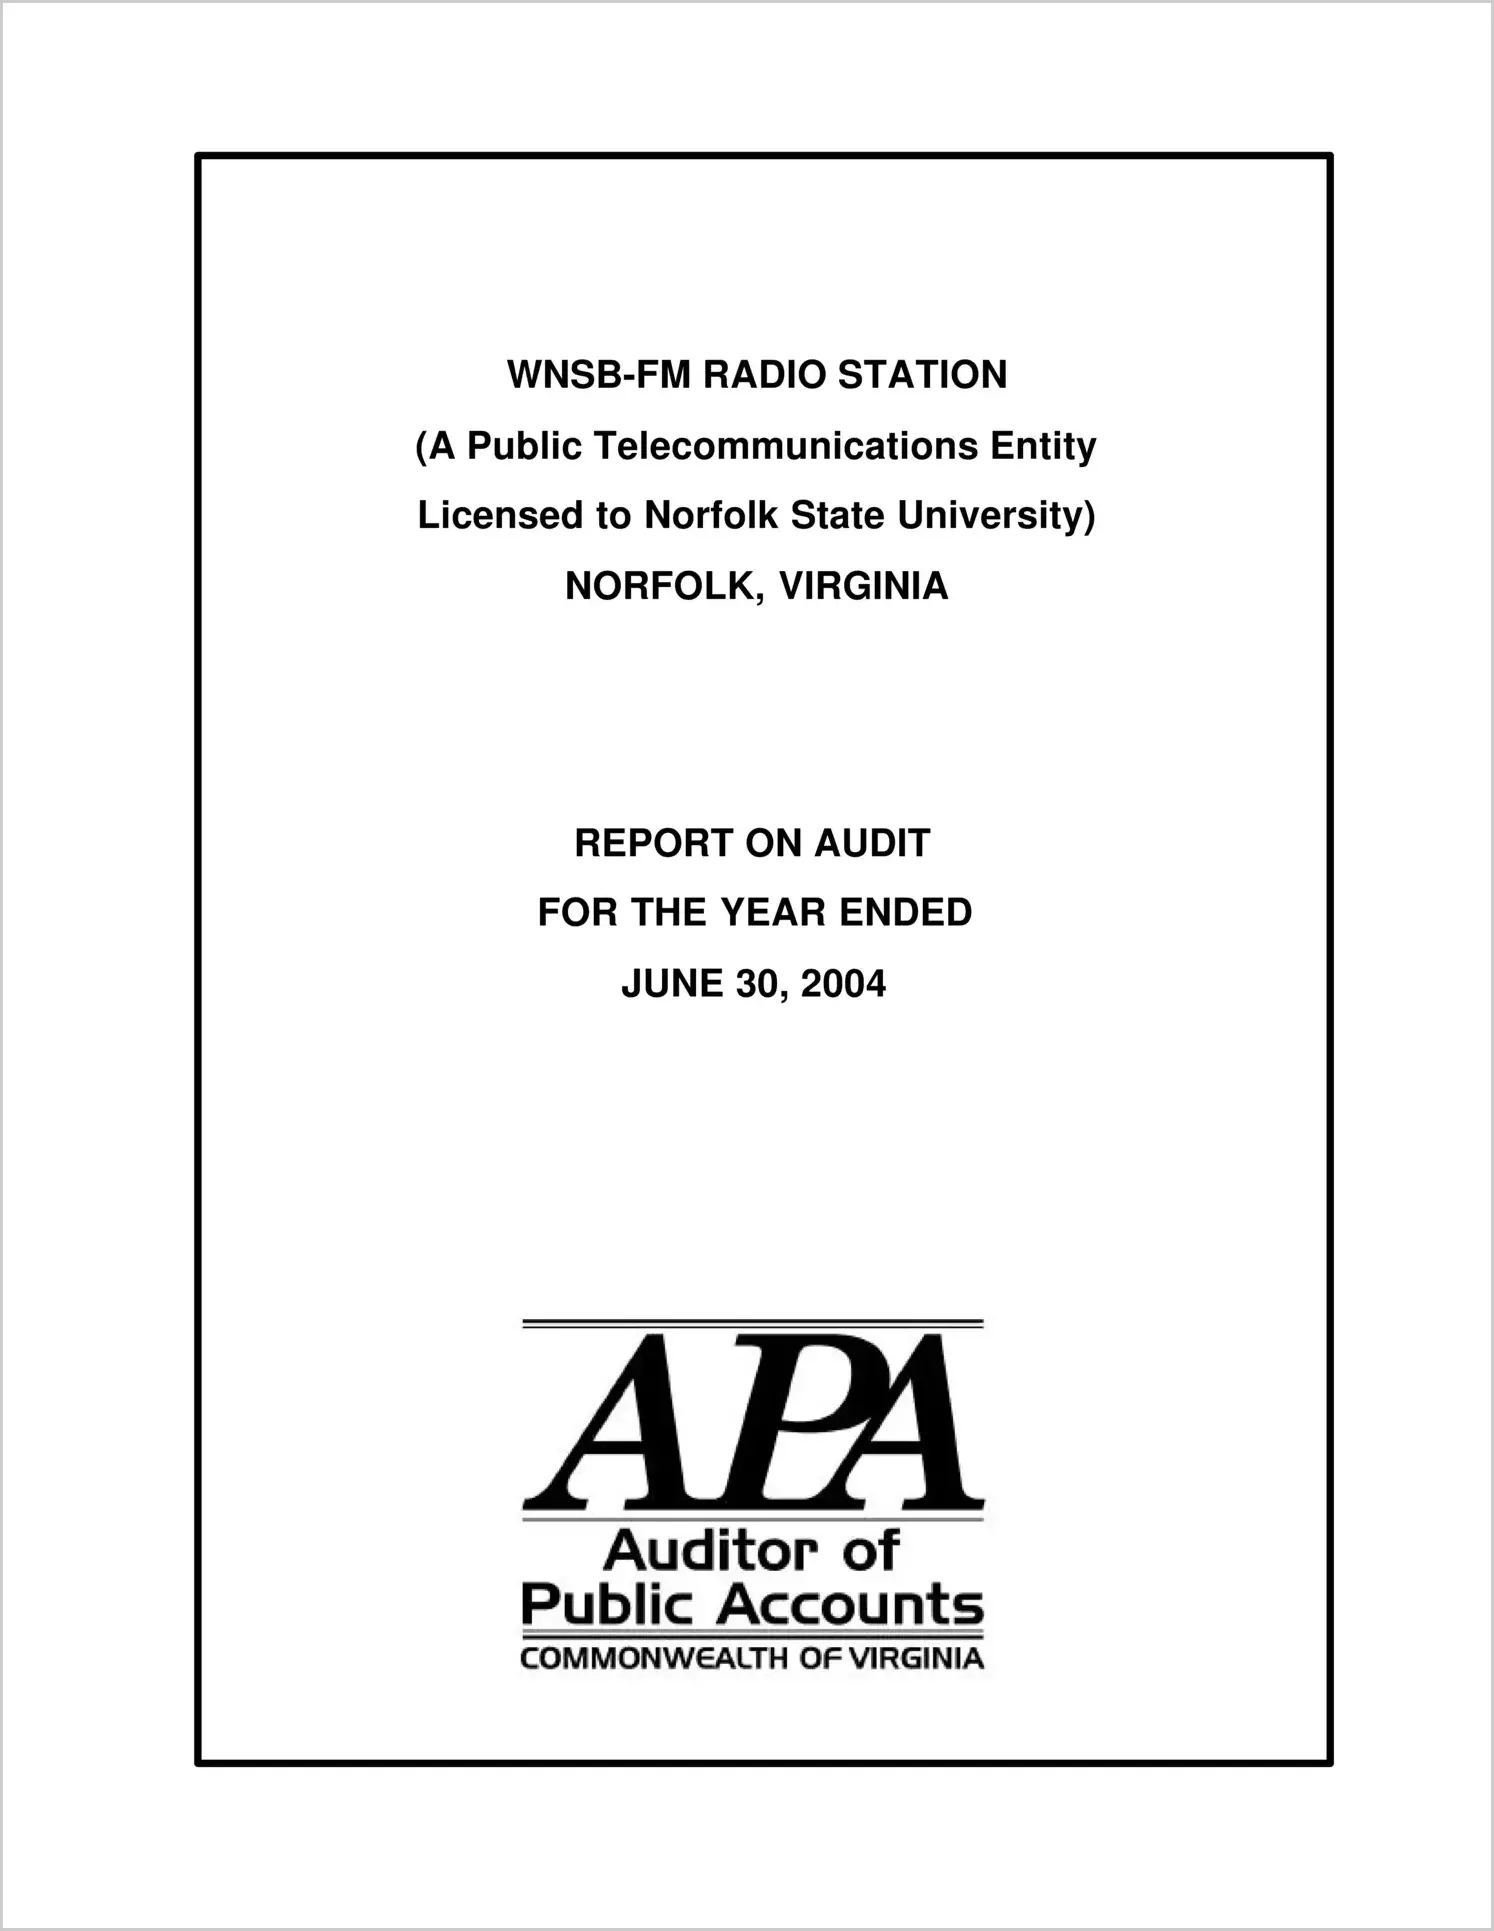 Norfolk State University WNSB-FM Radio Station for the year ended June 30, 2004